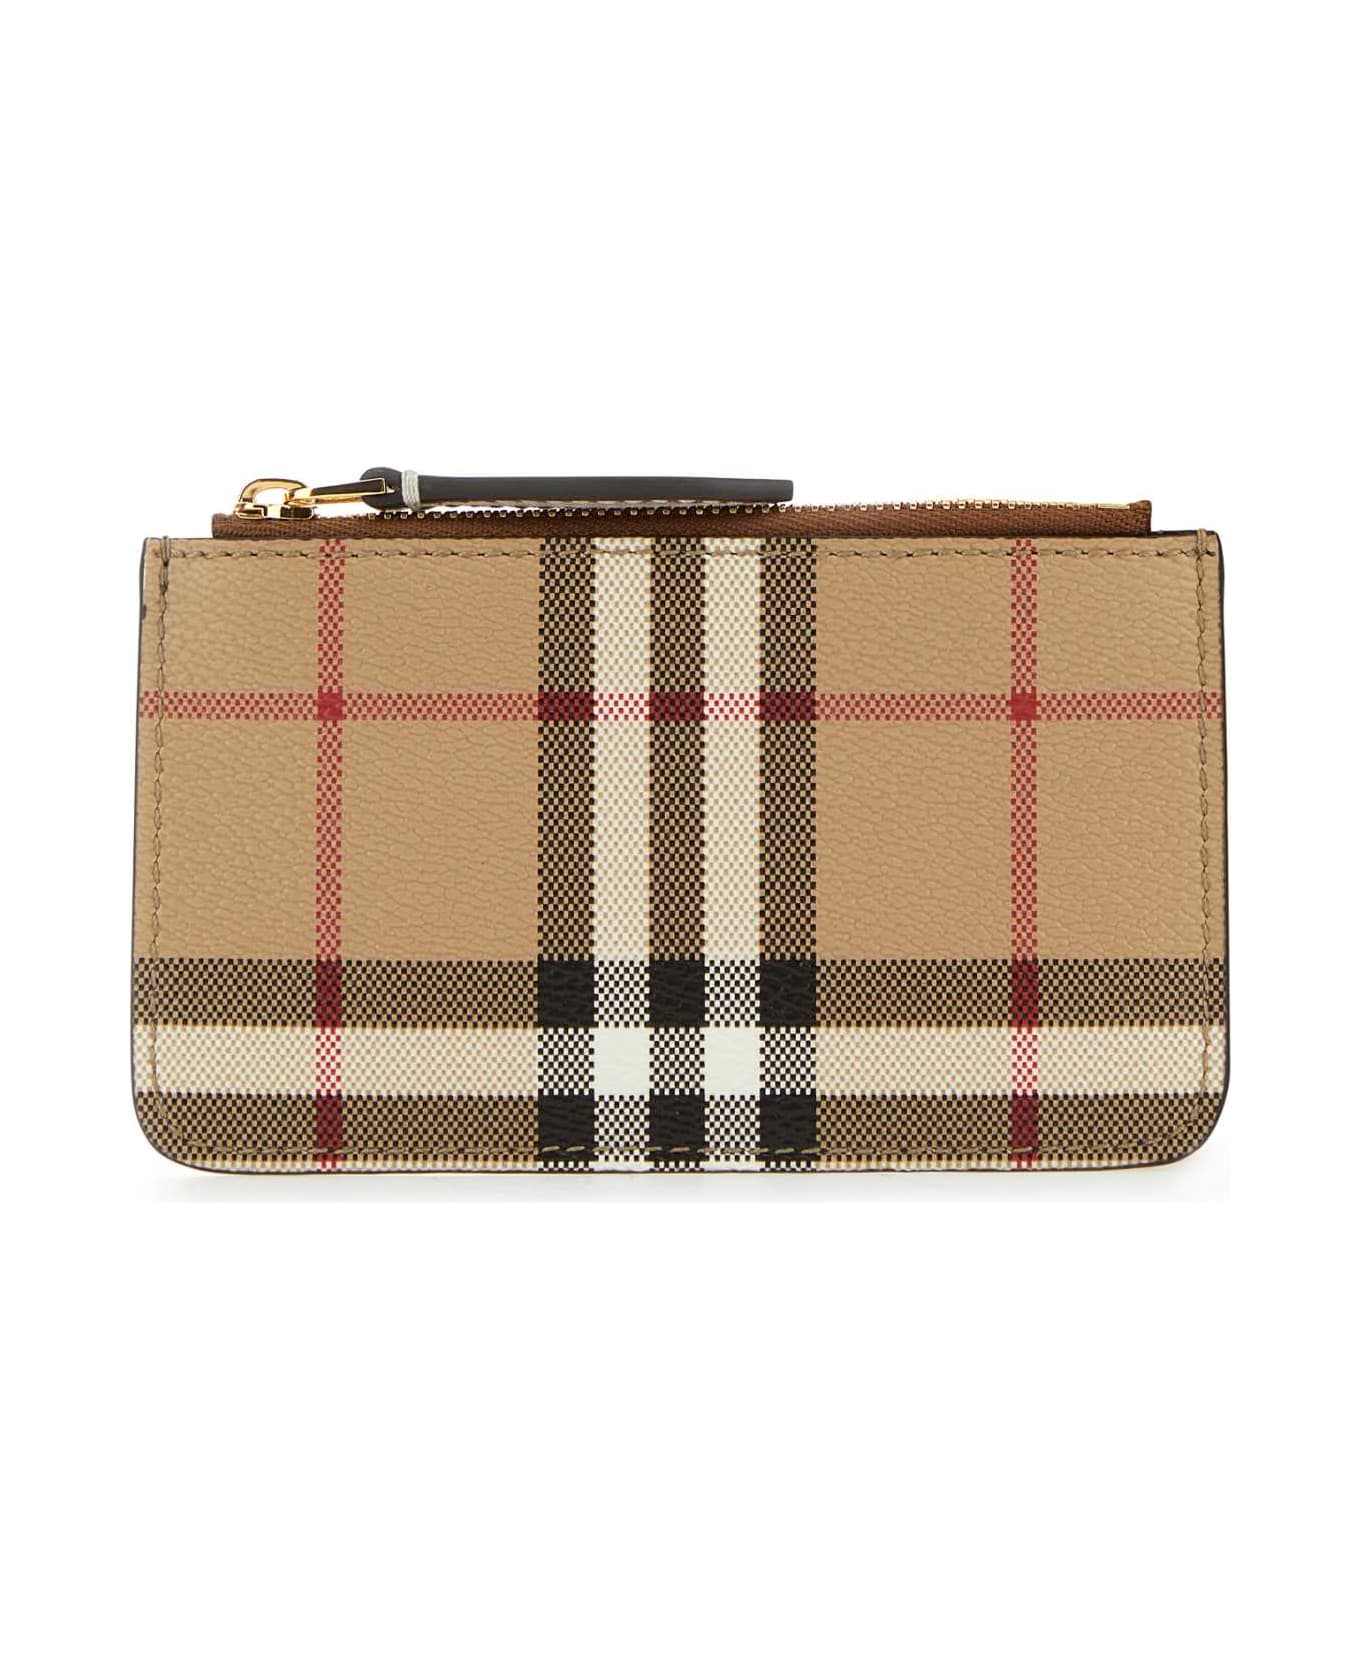 Burberry Printed Canvas Coin Purse - ARCHIVEBEIGE